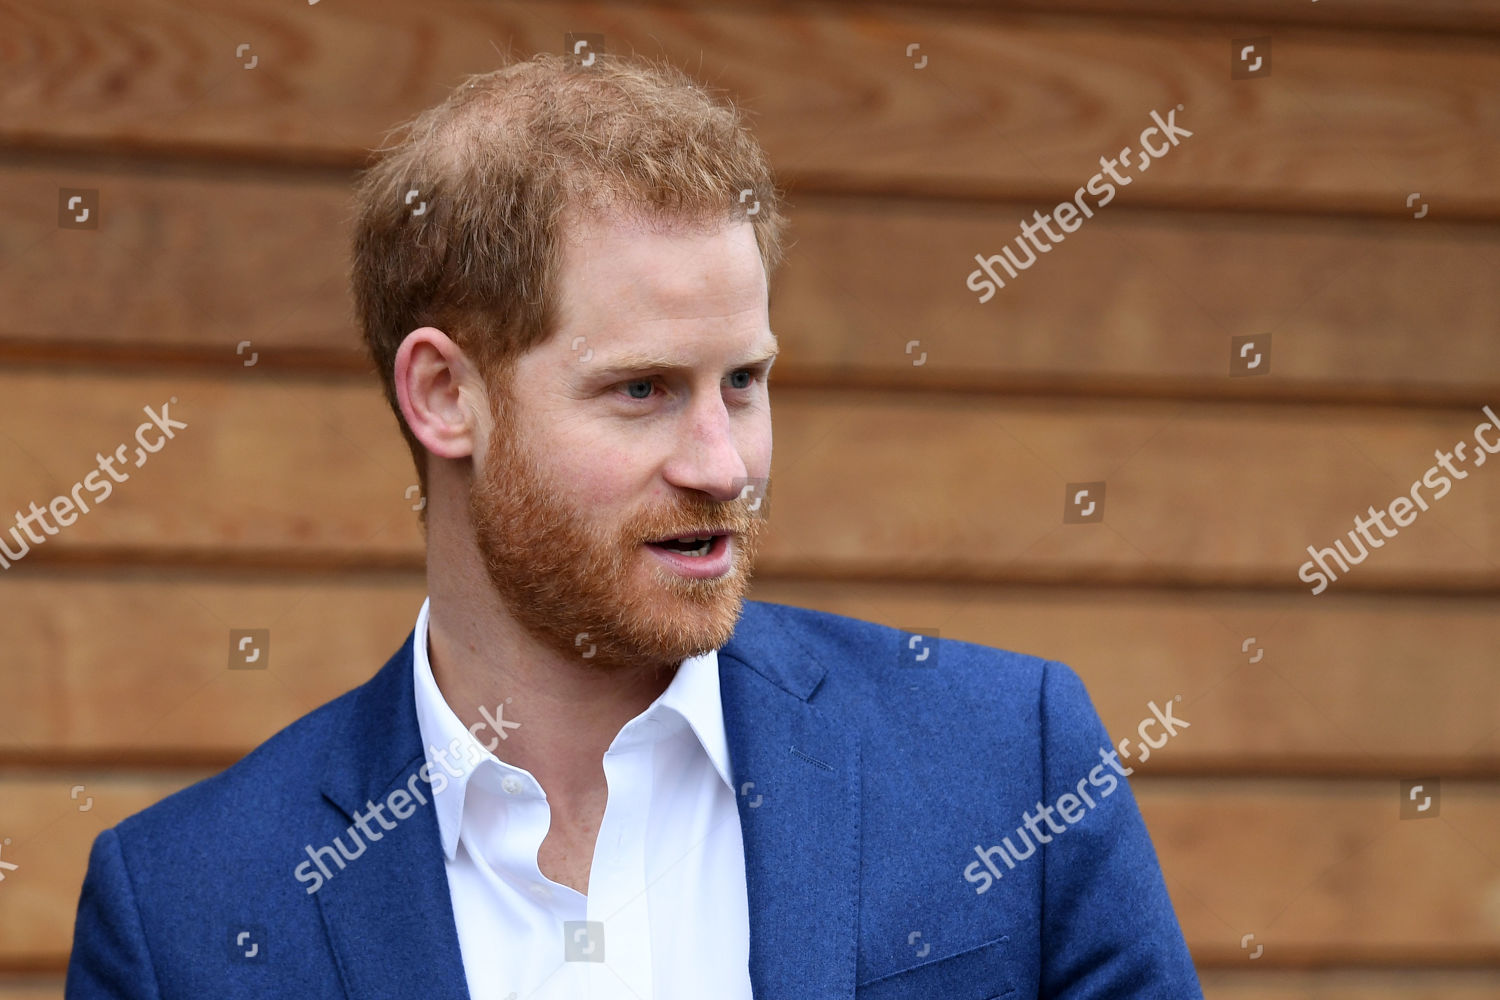 prince-harry-visits-st-vincents-catholic-primary-school-for-commonwealth-canopy-and-woodland-trust-tree-planting-ceremony-london-uk-shutterstock-editorial-10160984ar.jpg